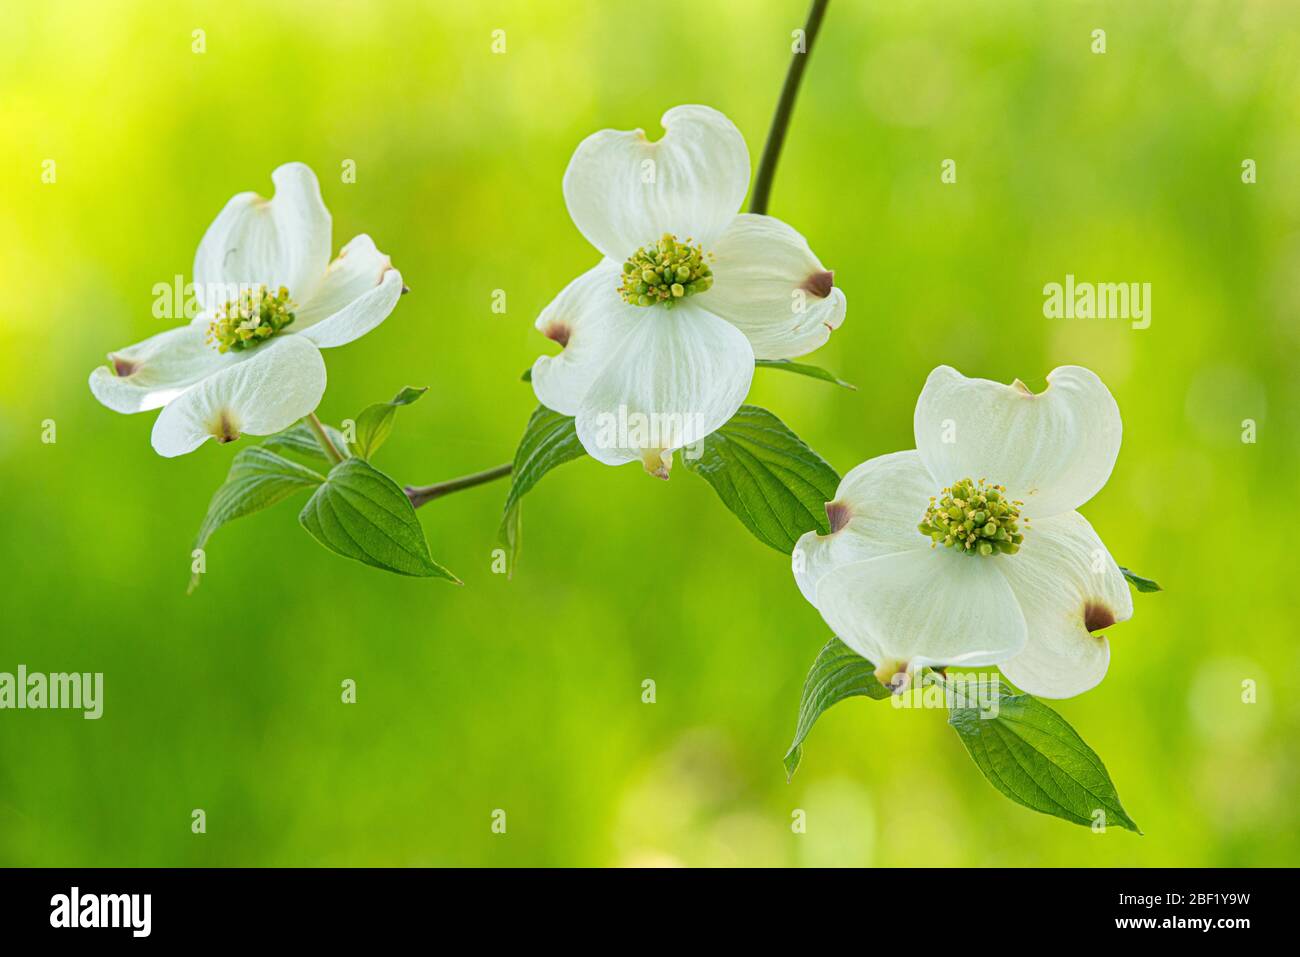 A group of white flowers with green stems photo – Free Flowers Image on  Unsplash